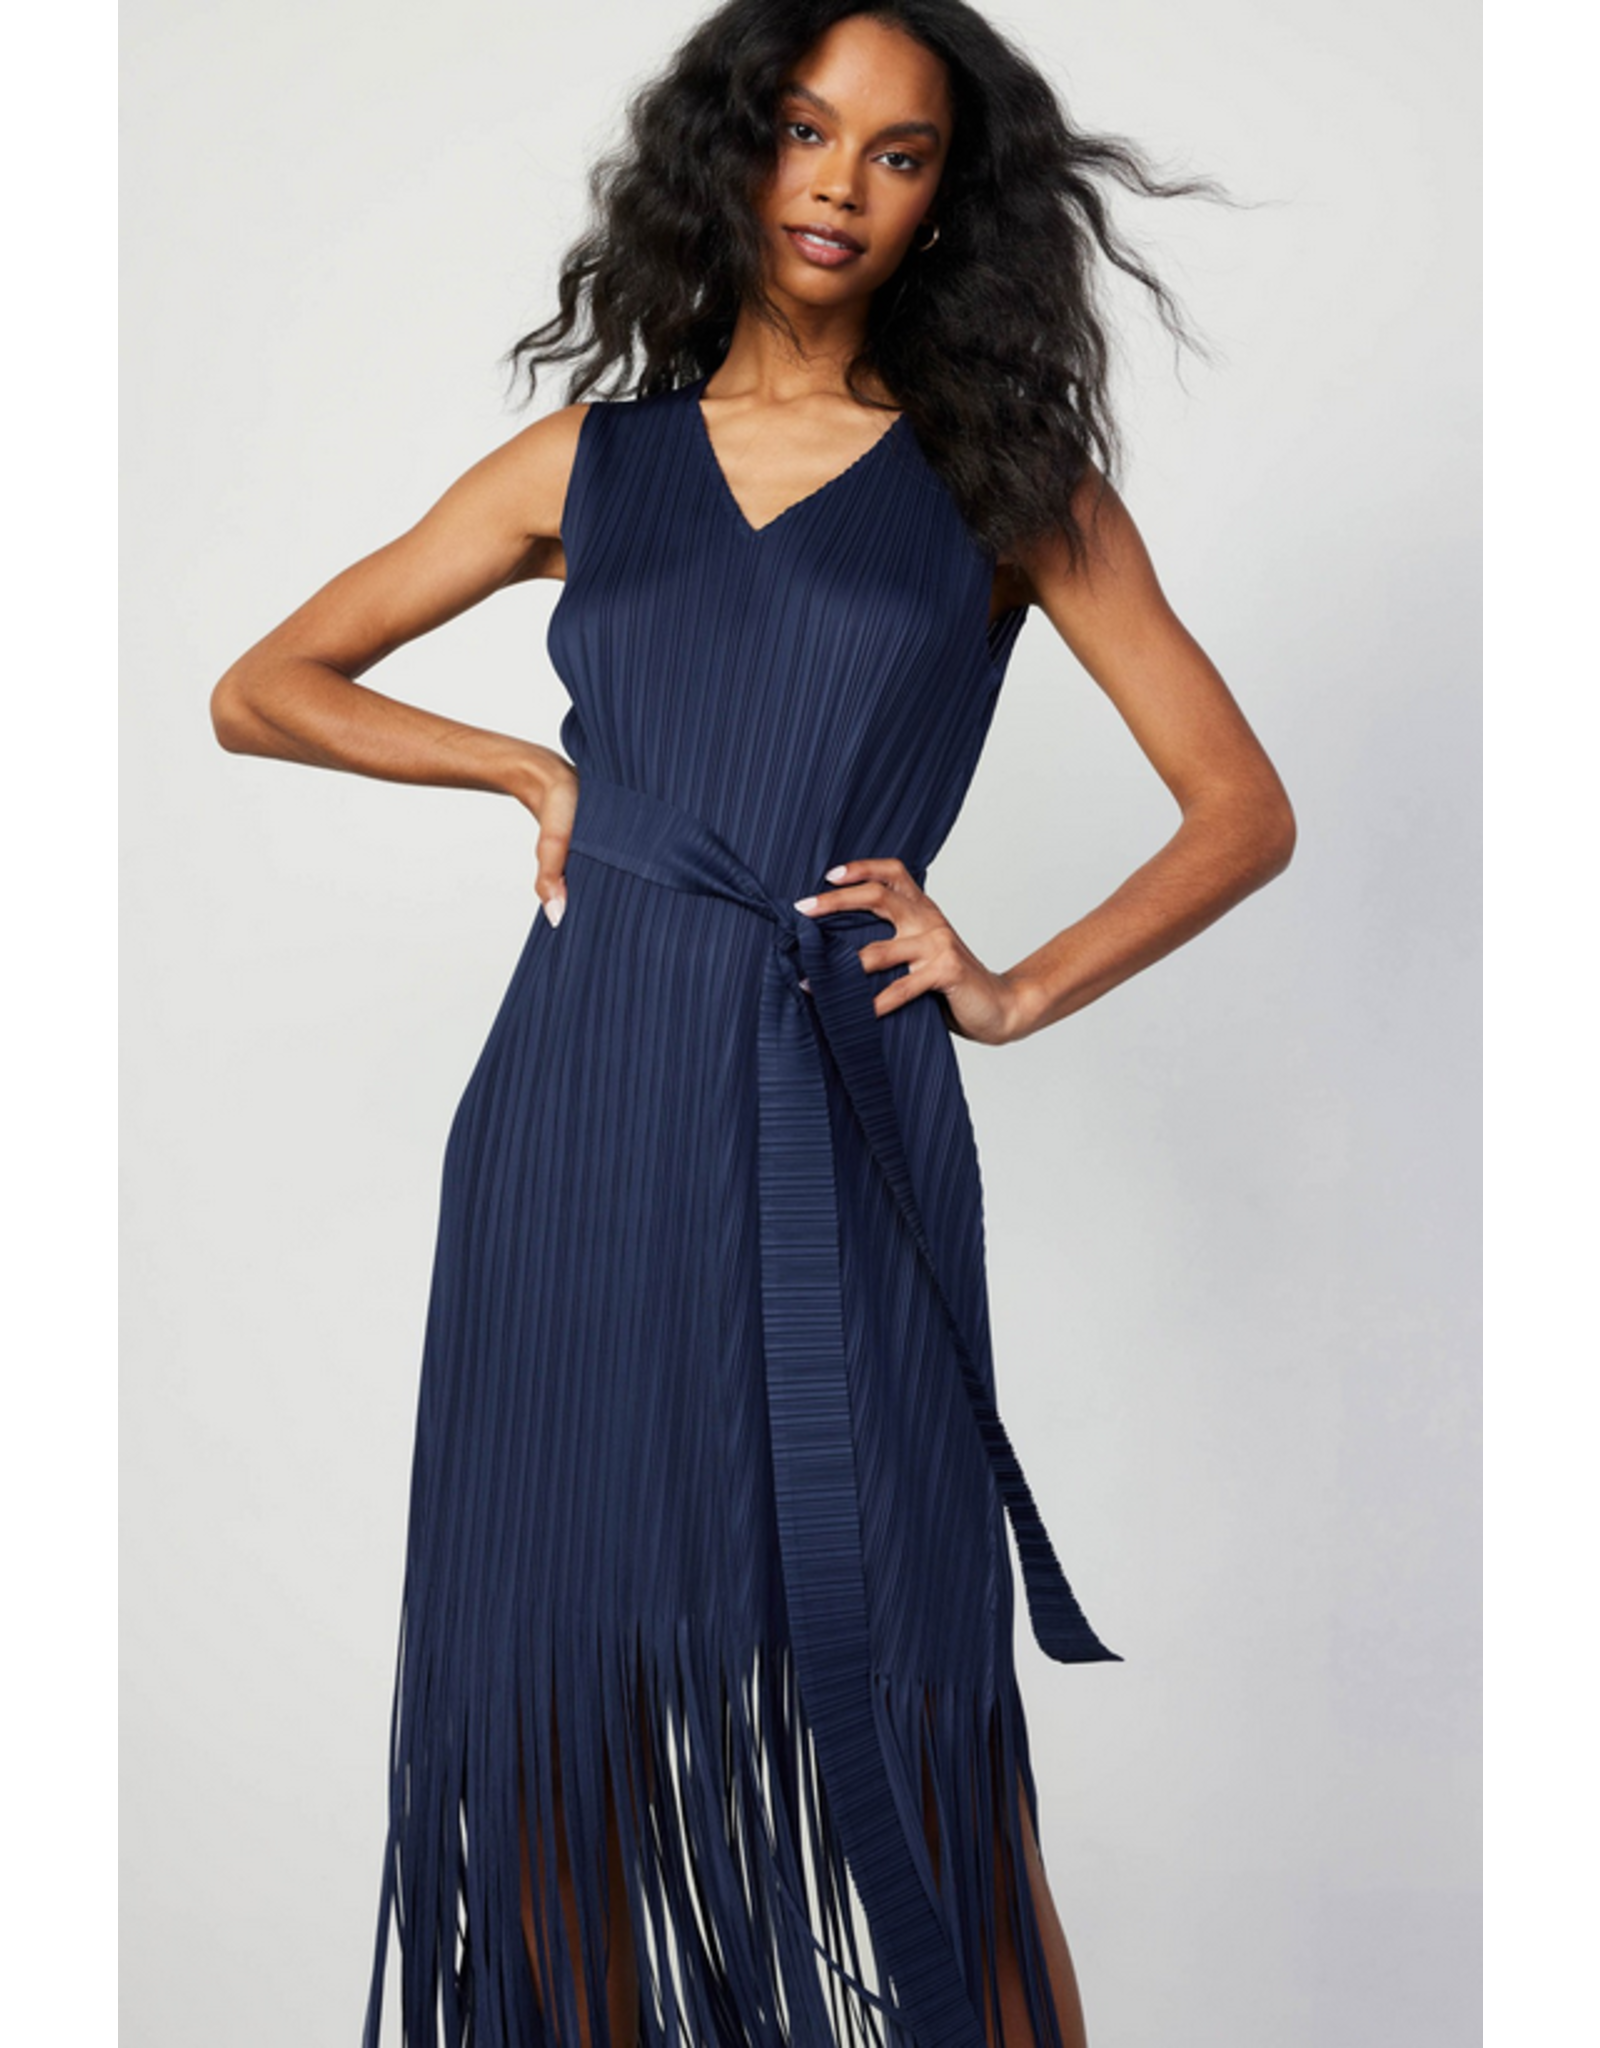 Current Air Sleeveless Pleated Dress with Fringe Detail